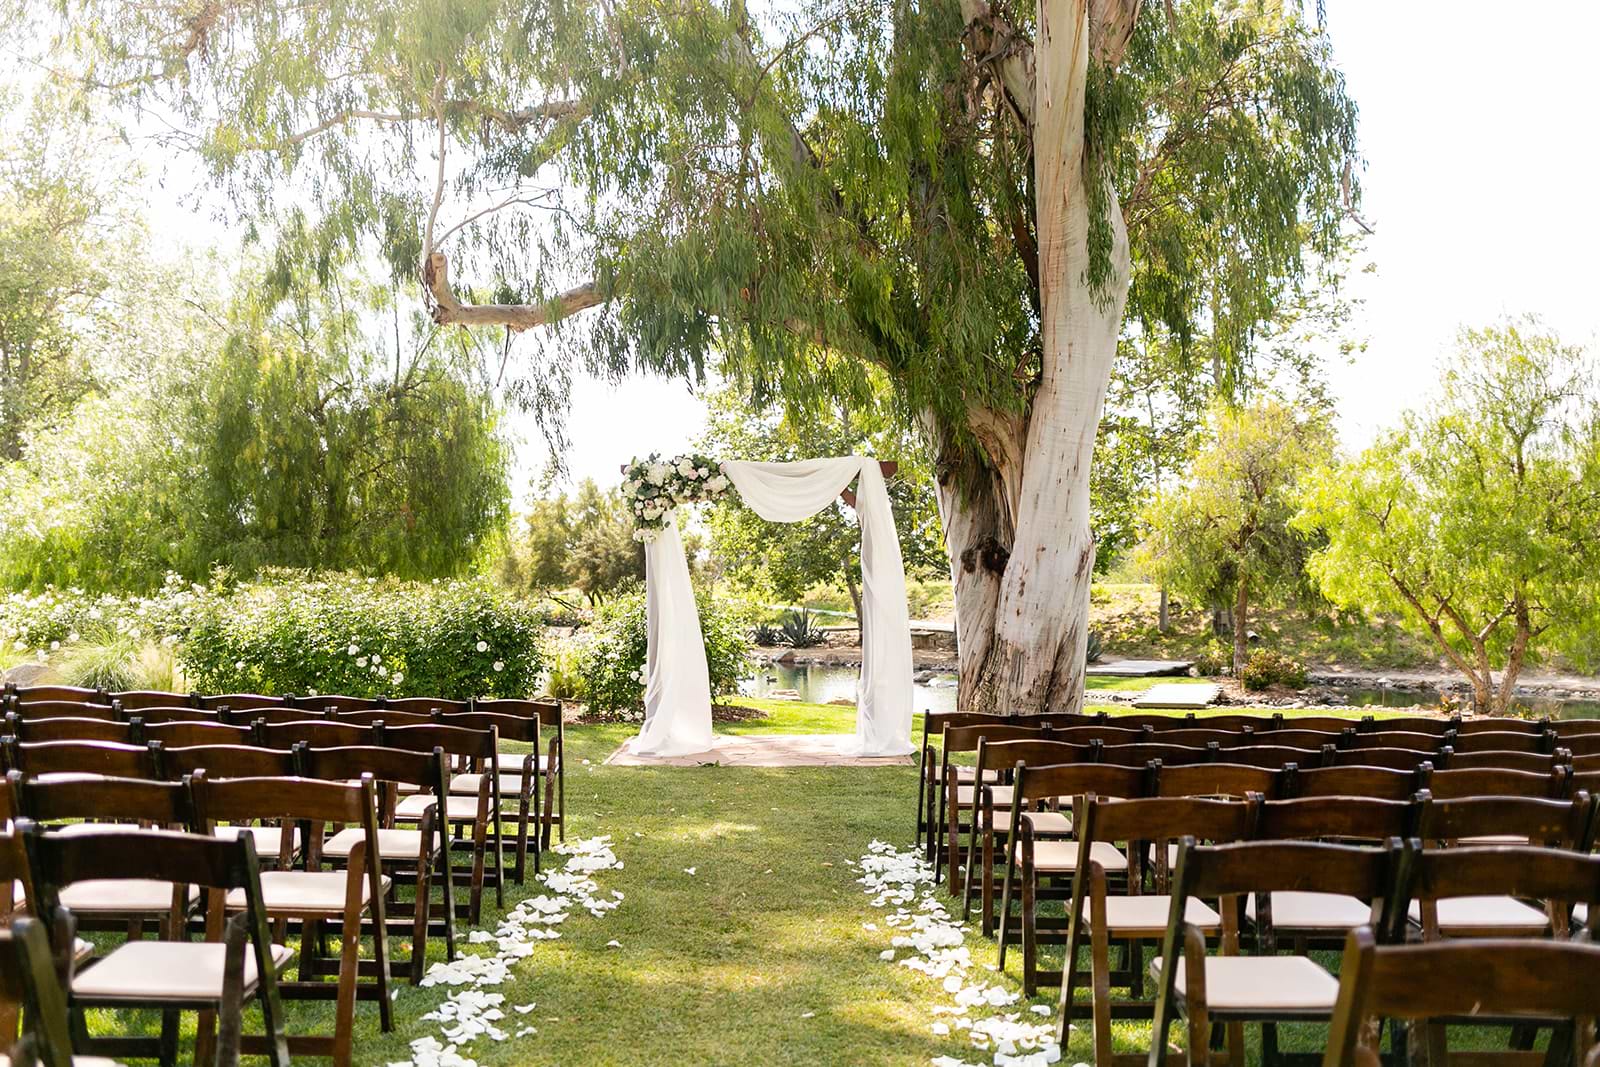 outdoor wedding ceremony setup at Galway Downs in Temecula, CA